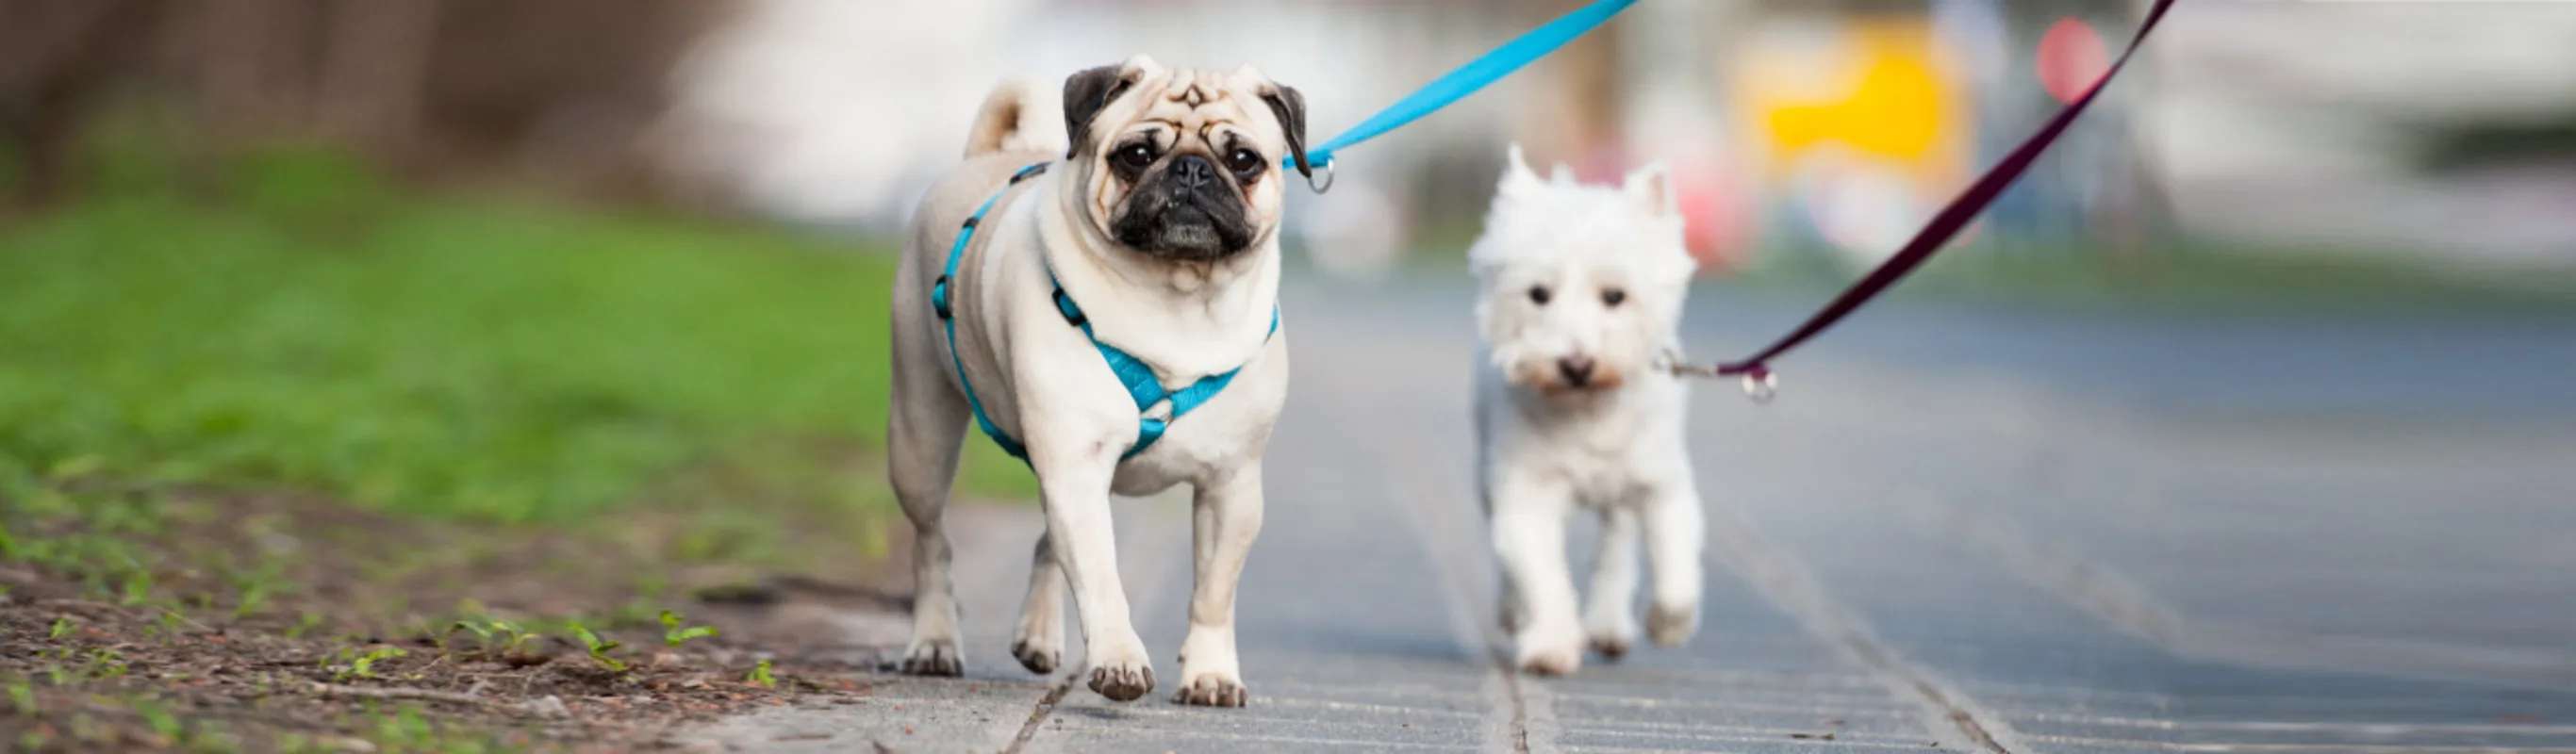 Two Dogs with Leashes on a Walk